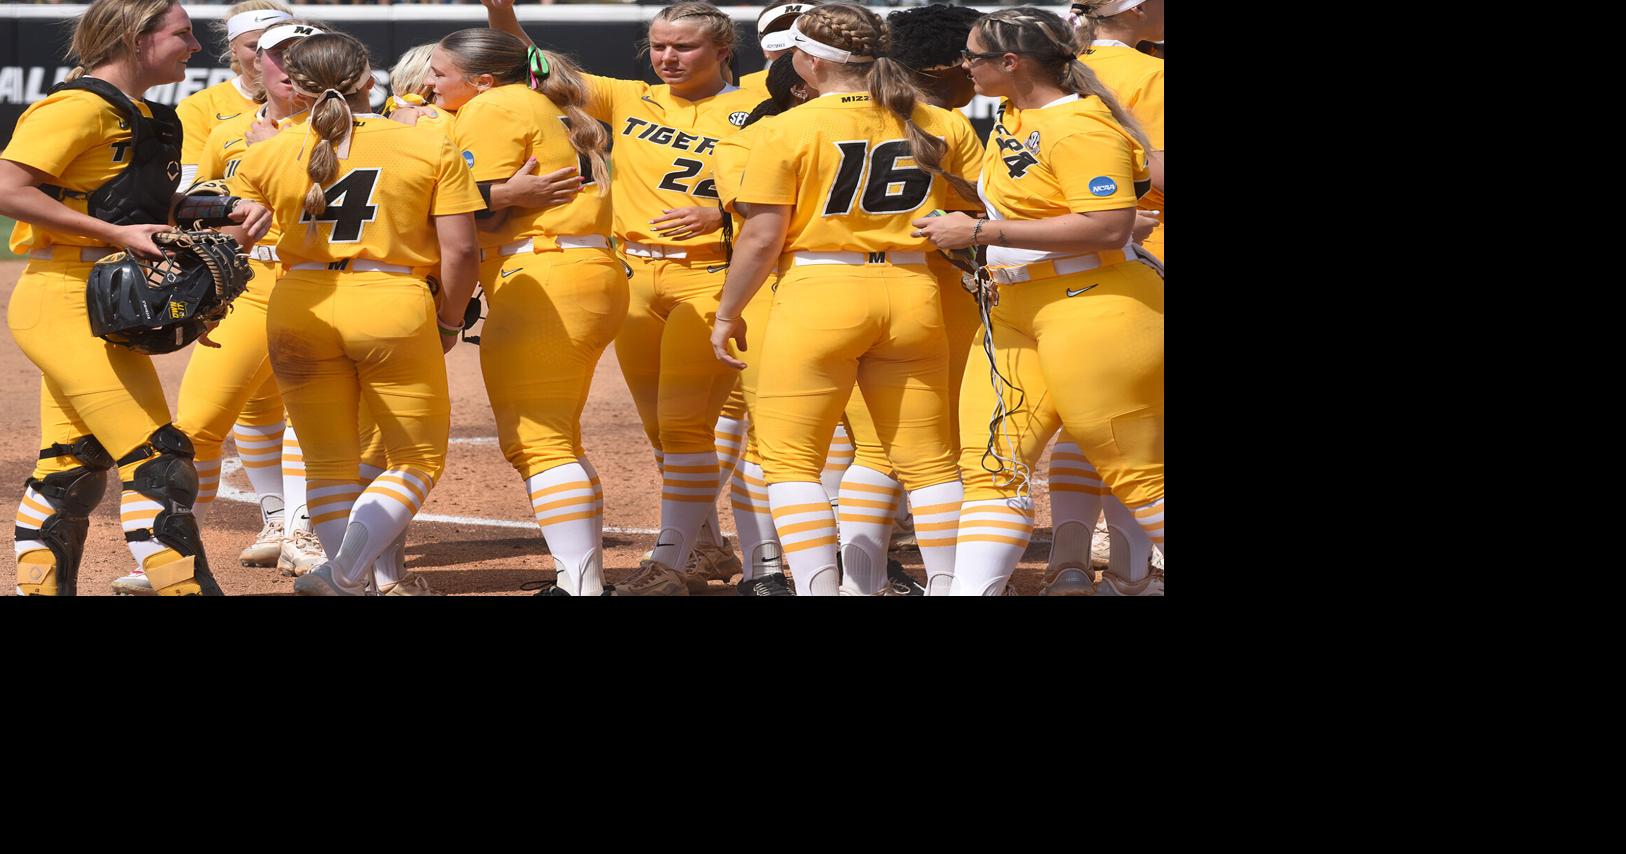 Mizzou mounts comeback to clinch Regional victory and advance to Super Regionals | Sports